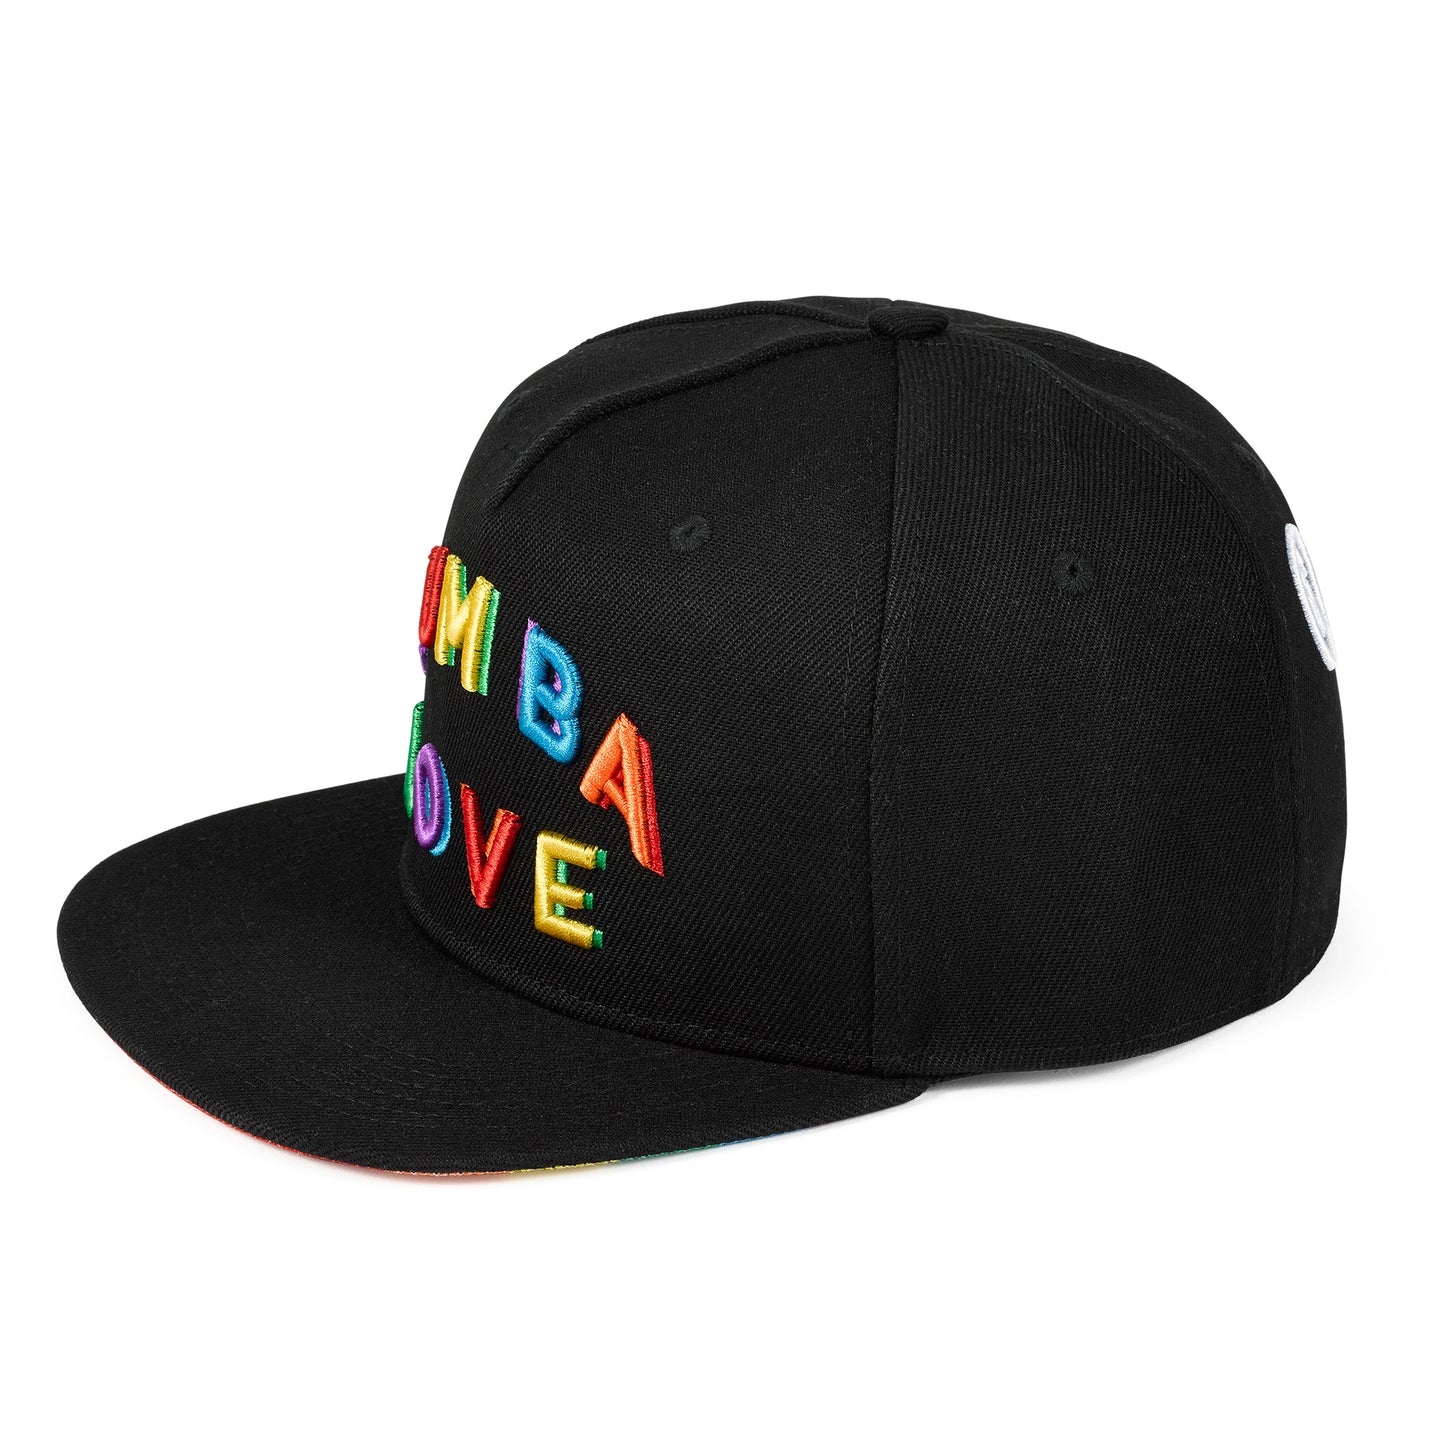 Made With Zumba Love Snapback Hat